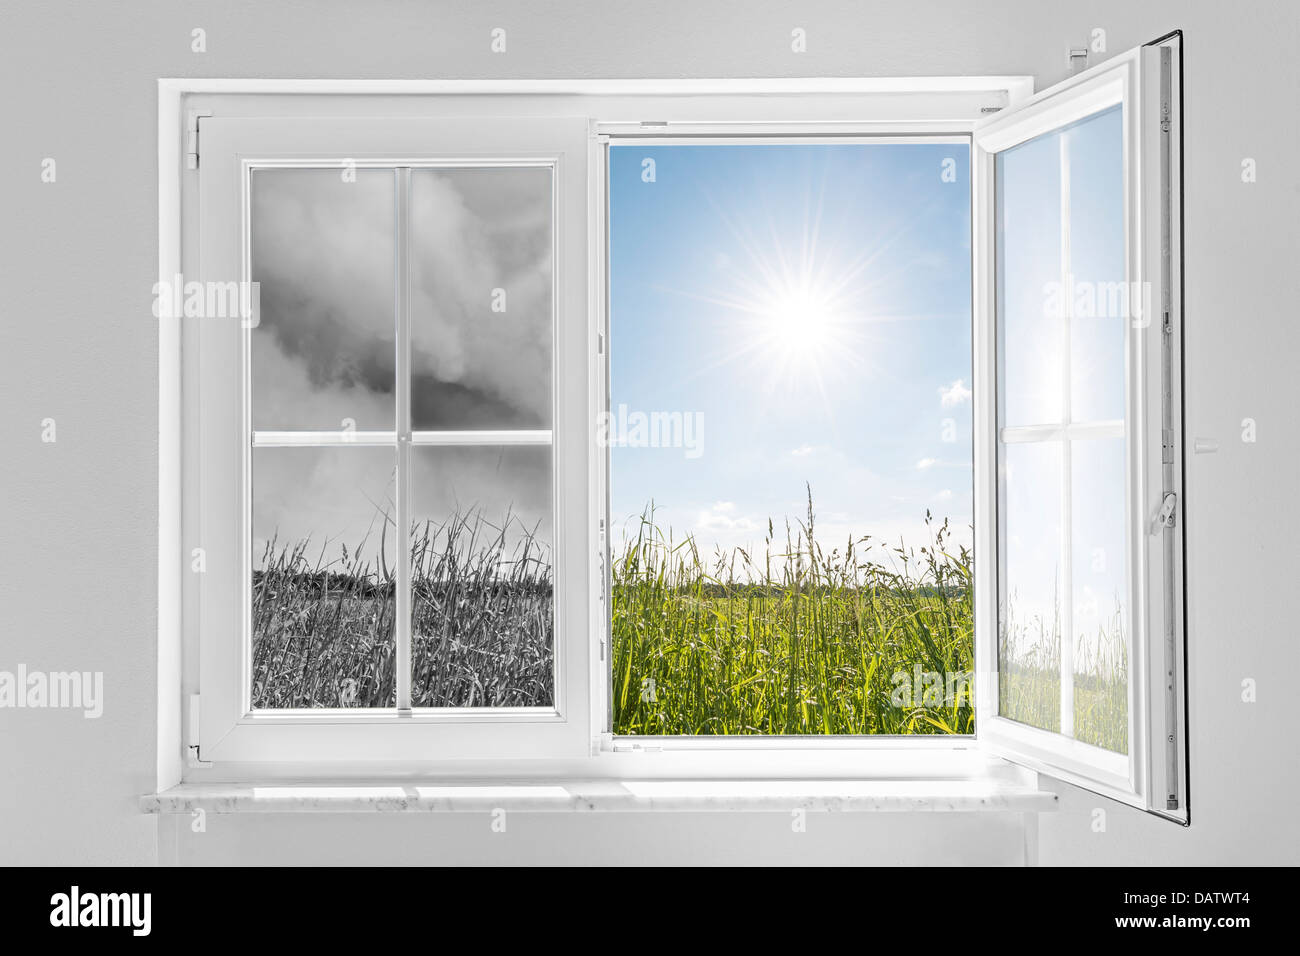 Half open window with view to the outside half on gray storm and half on clouds in blue sky with sun Stock Photo